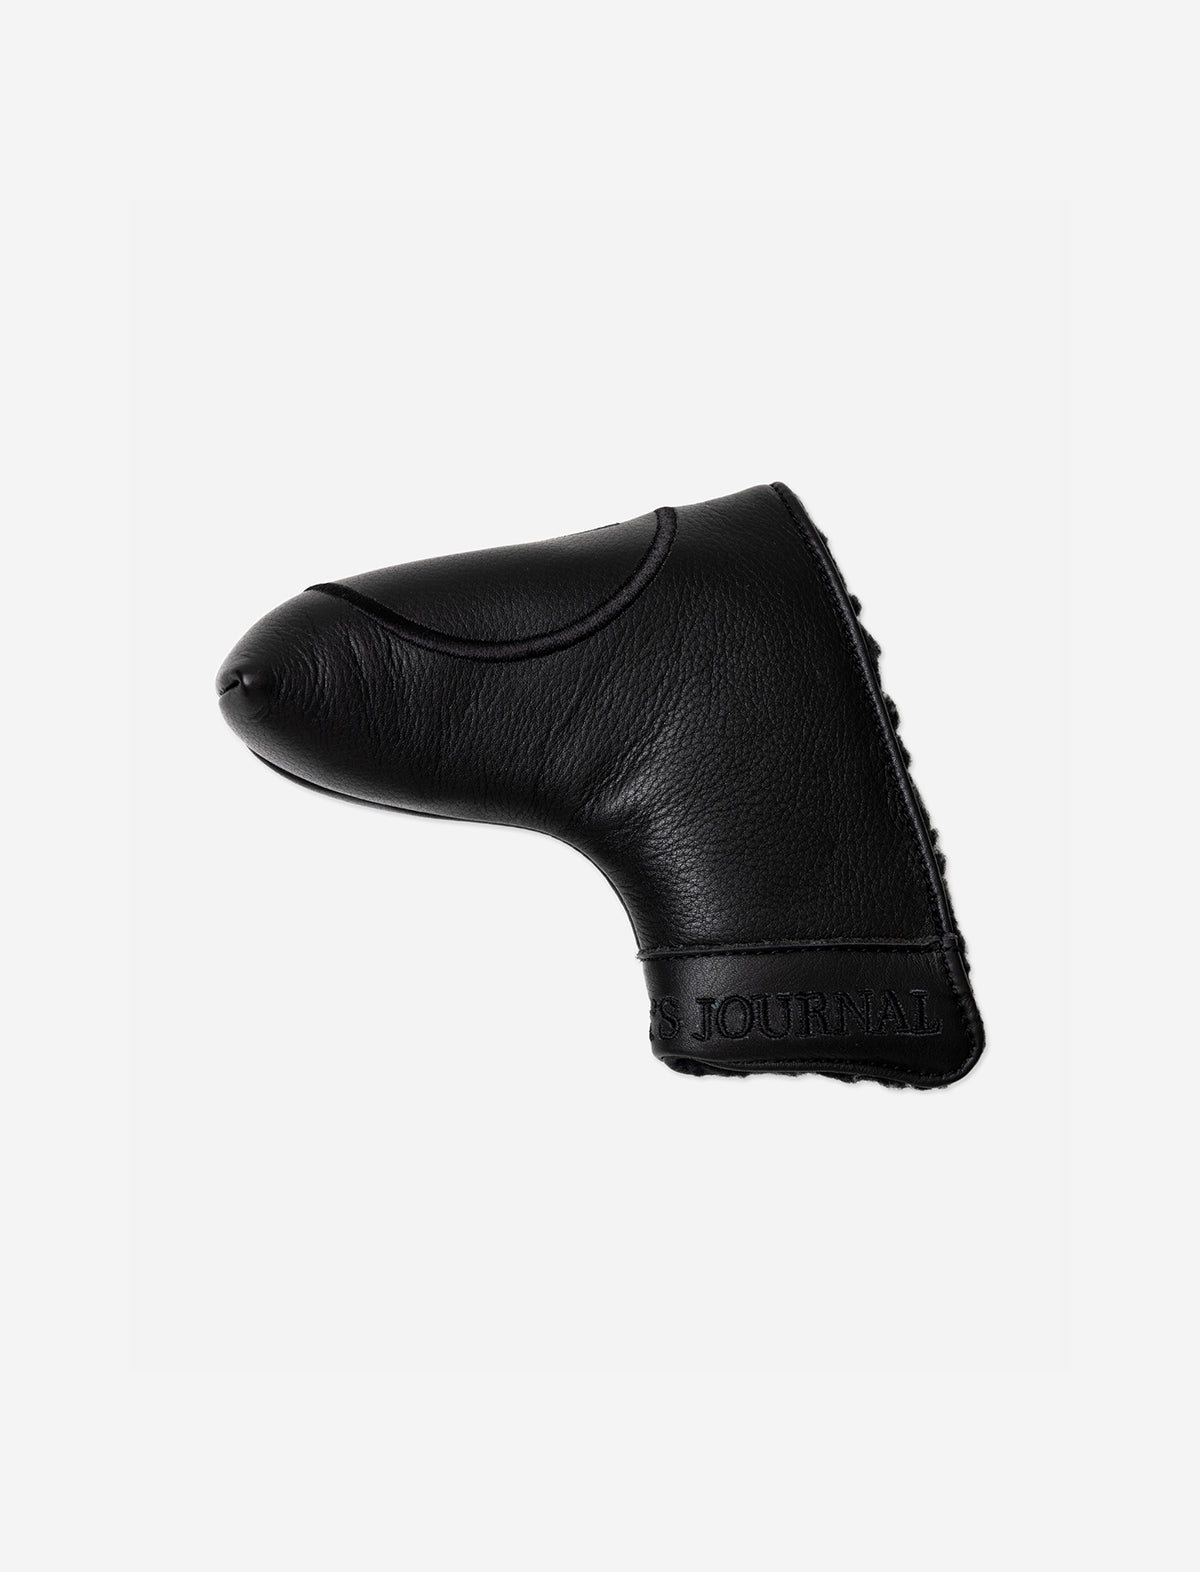 THE GOLFERS JOURNAL The Blade Putter Cover in Black